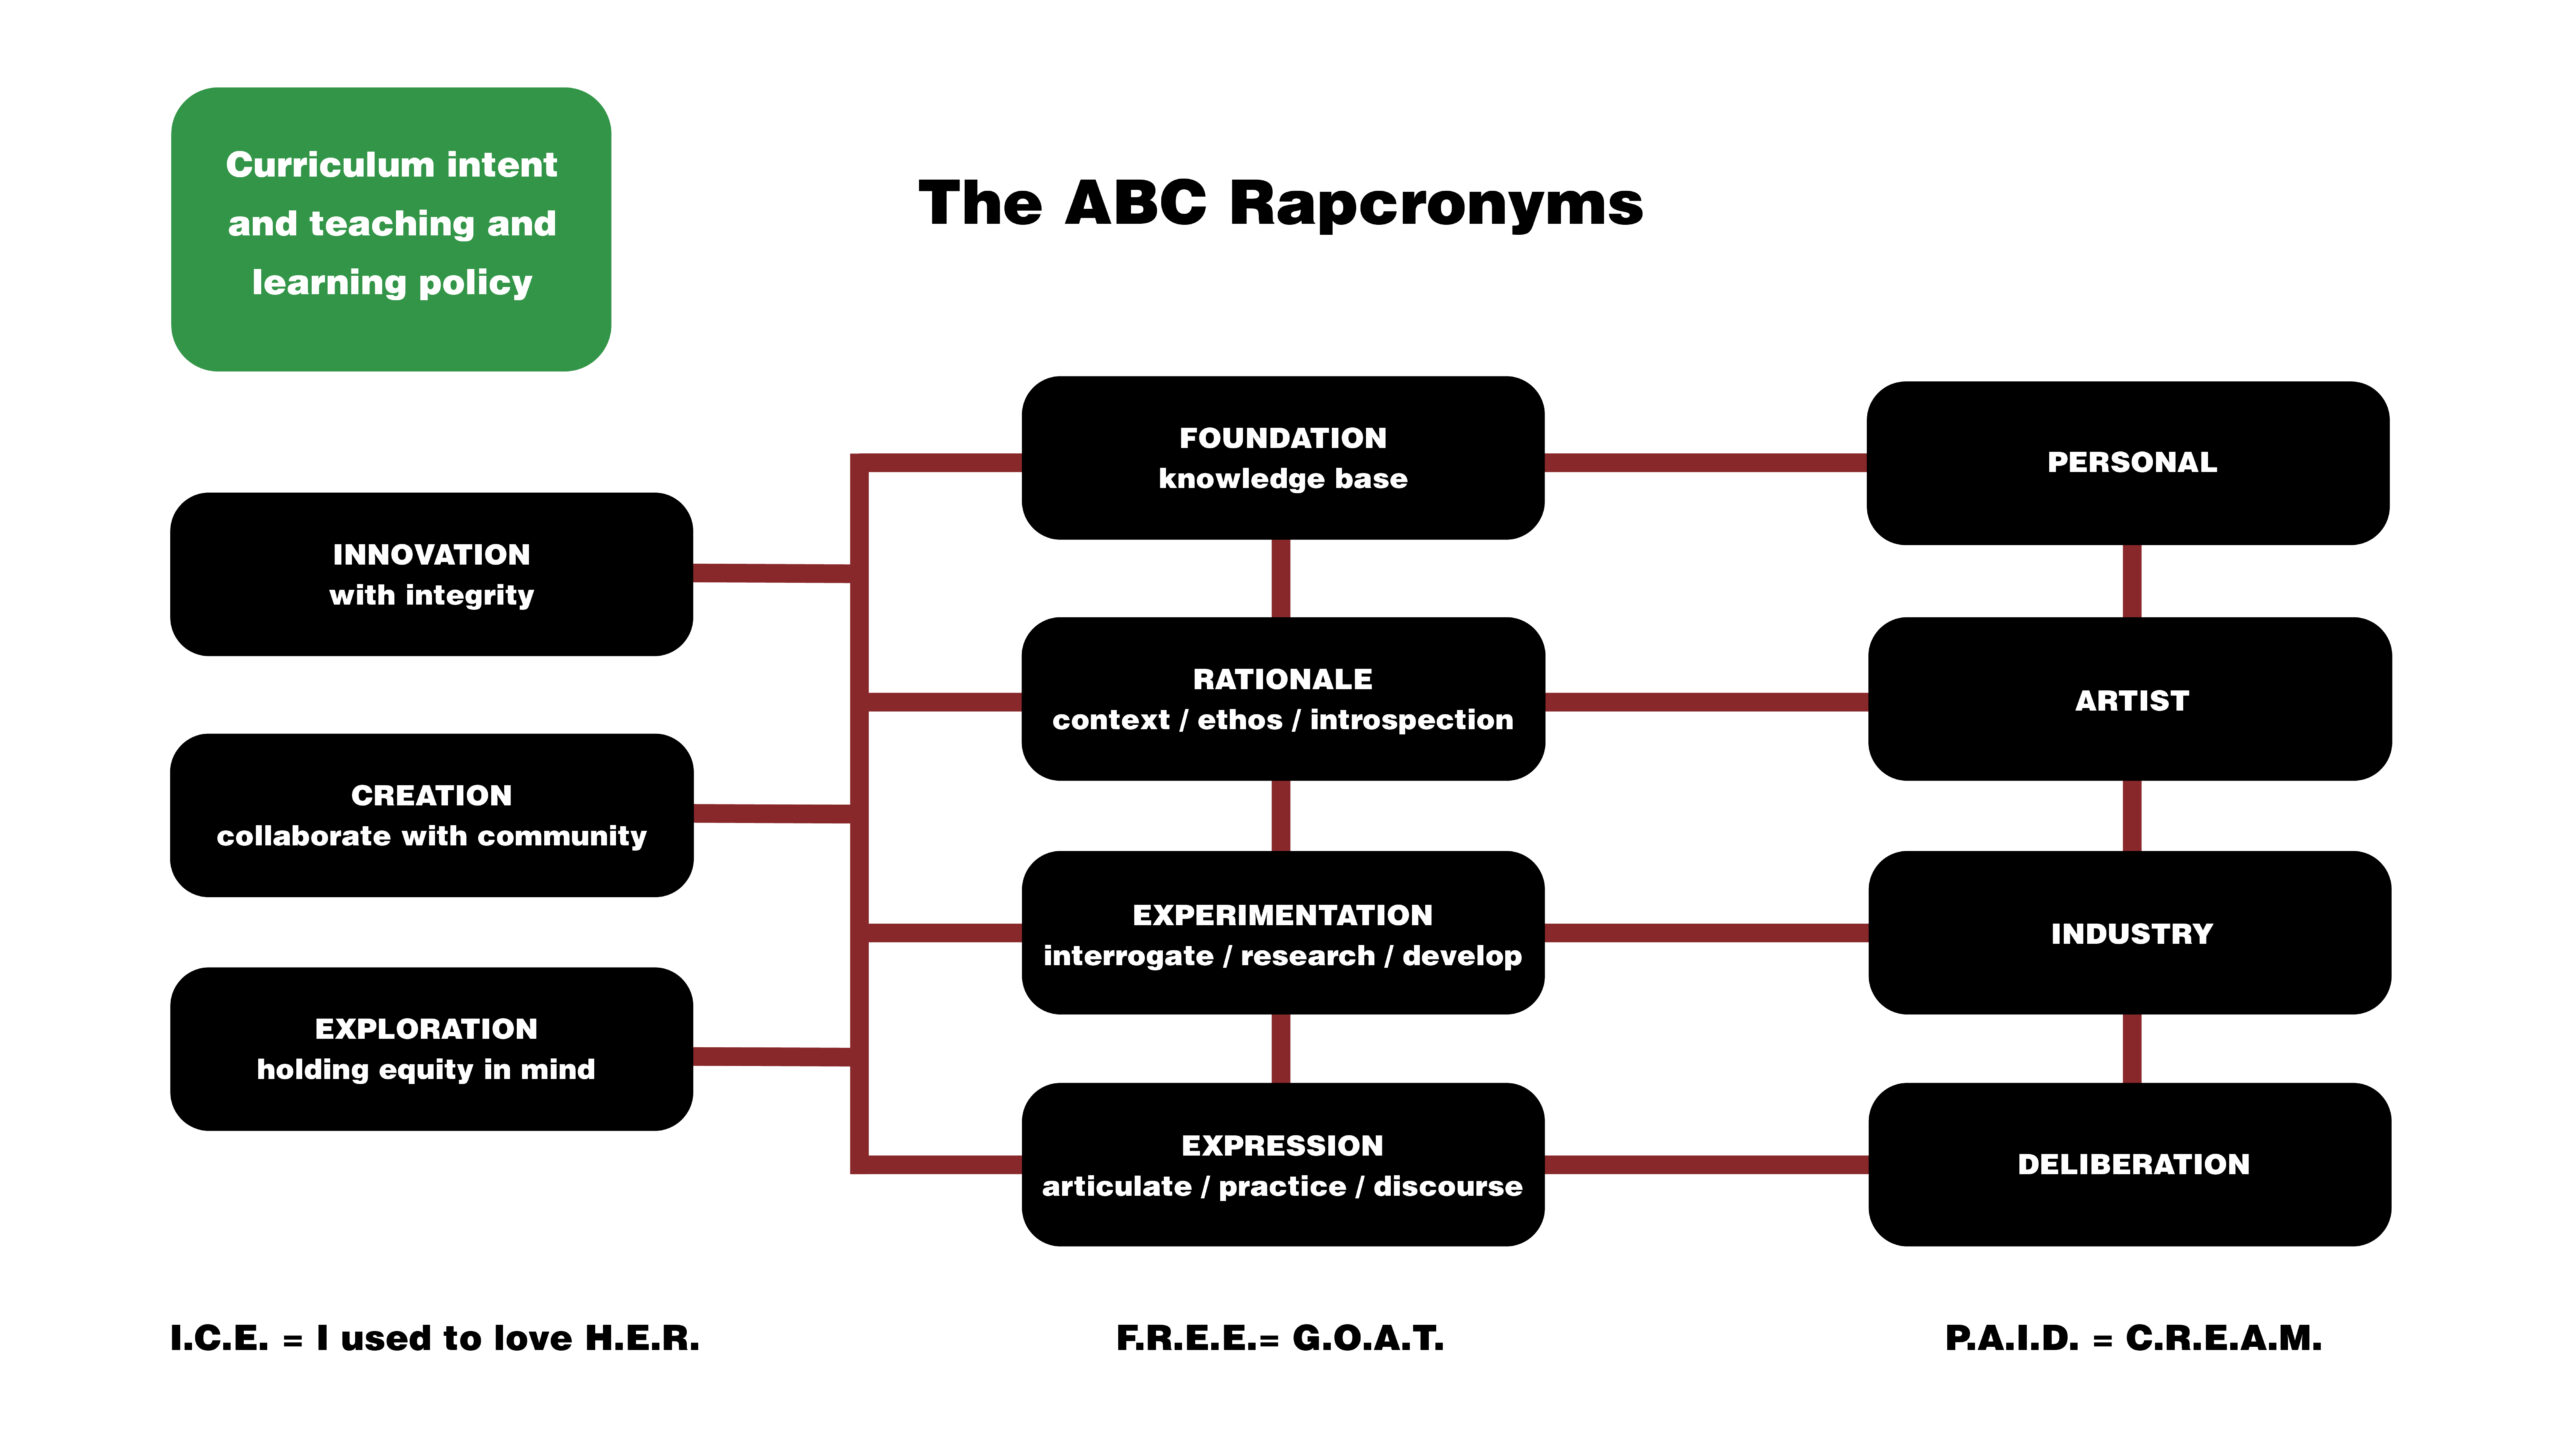 ABC Rapcronyms, curriculum intent and teaching and learning policy. I.C.E = I used to love H.E.R Innovation - with integrity Creation - collaborate with community Exploration - holding equity in mind F.R.E.E = G.O.A.T Foundation - knowledge base Rationale - context / ethos / introspection Experimentation - interrogate / research / develop Expression - articulate / practice / discoure P.A.I.D = C.R.E.A.M Personal Artist Industry Deliberation